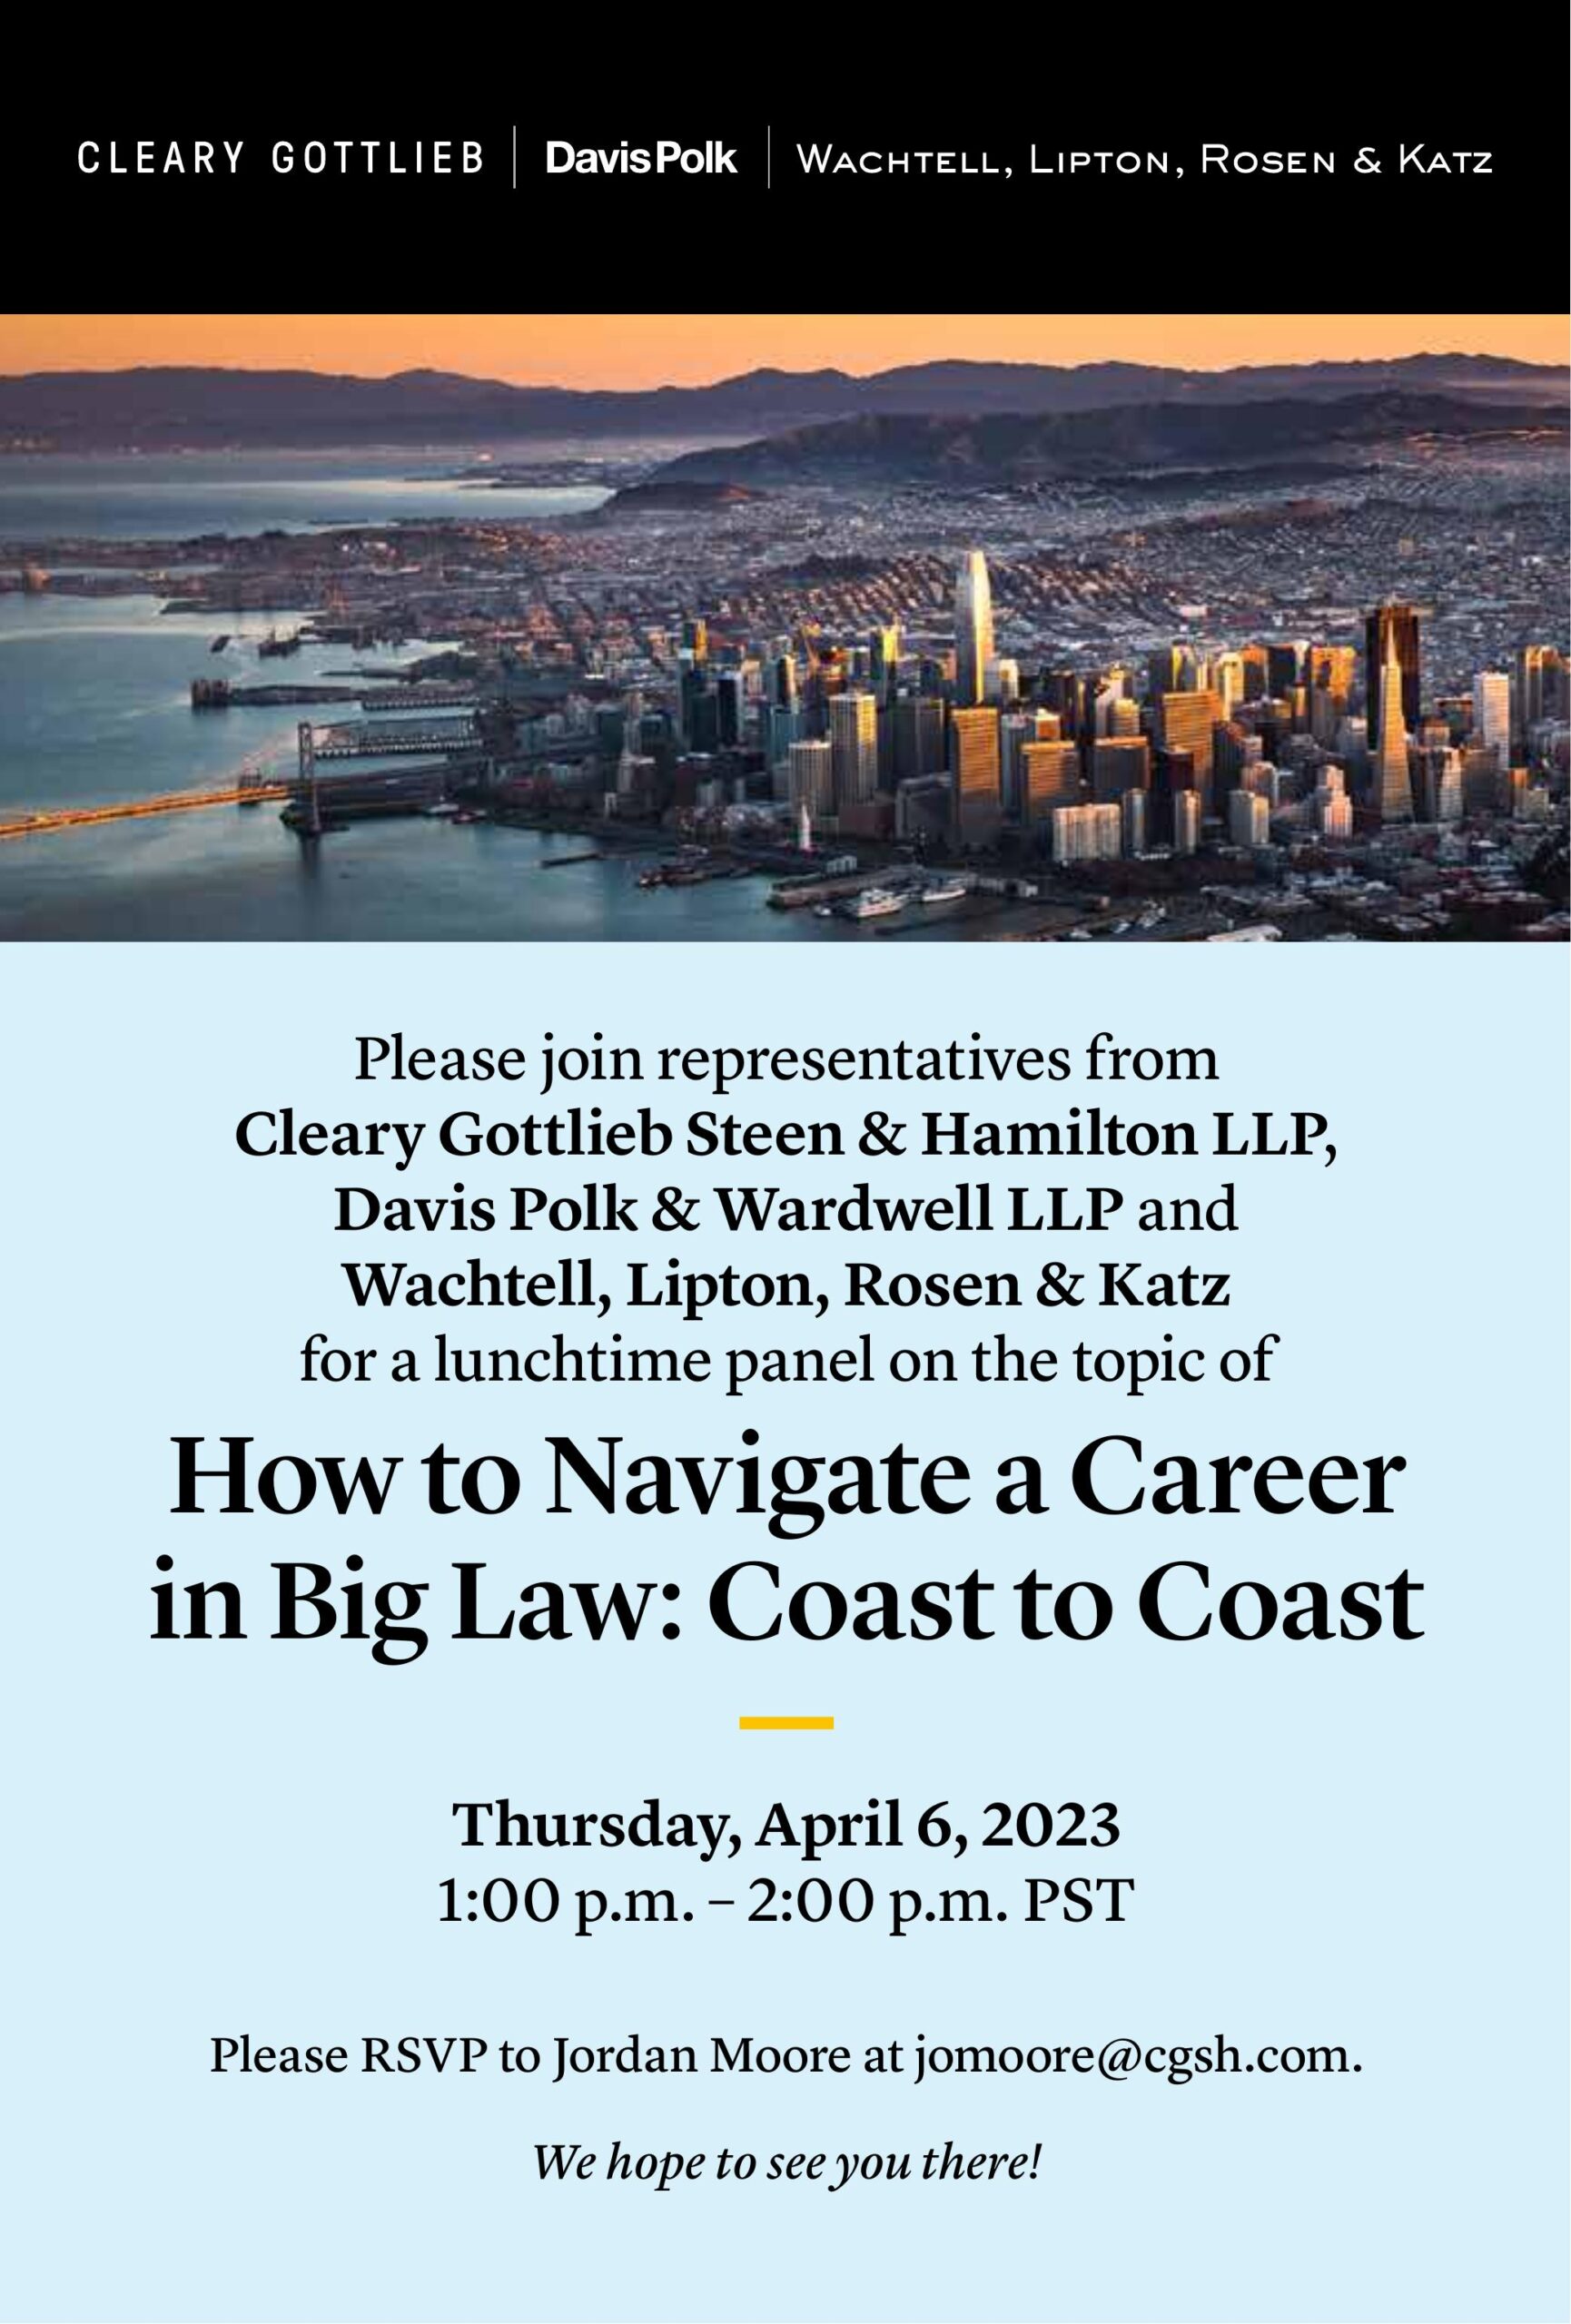 Event flyer: How to navigate a career in Big Law